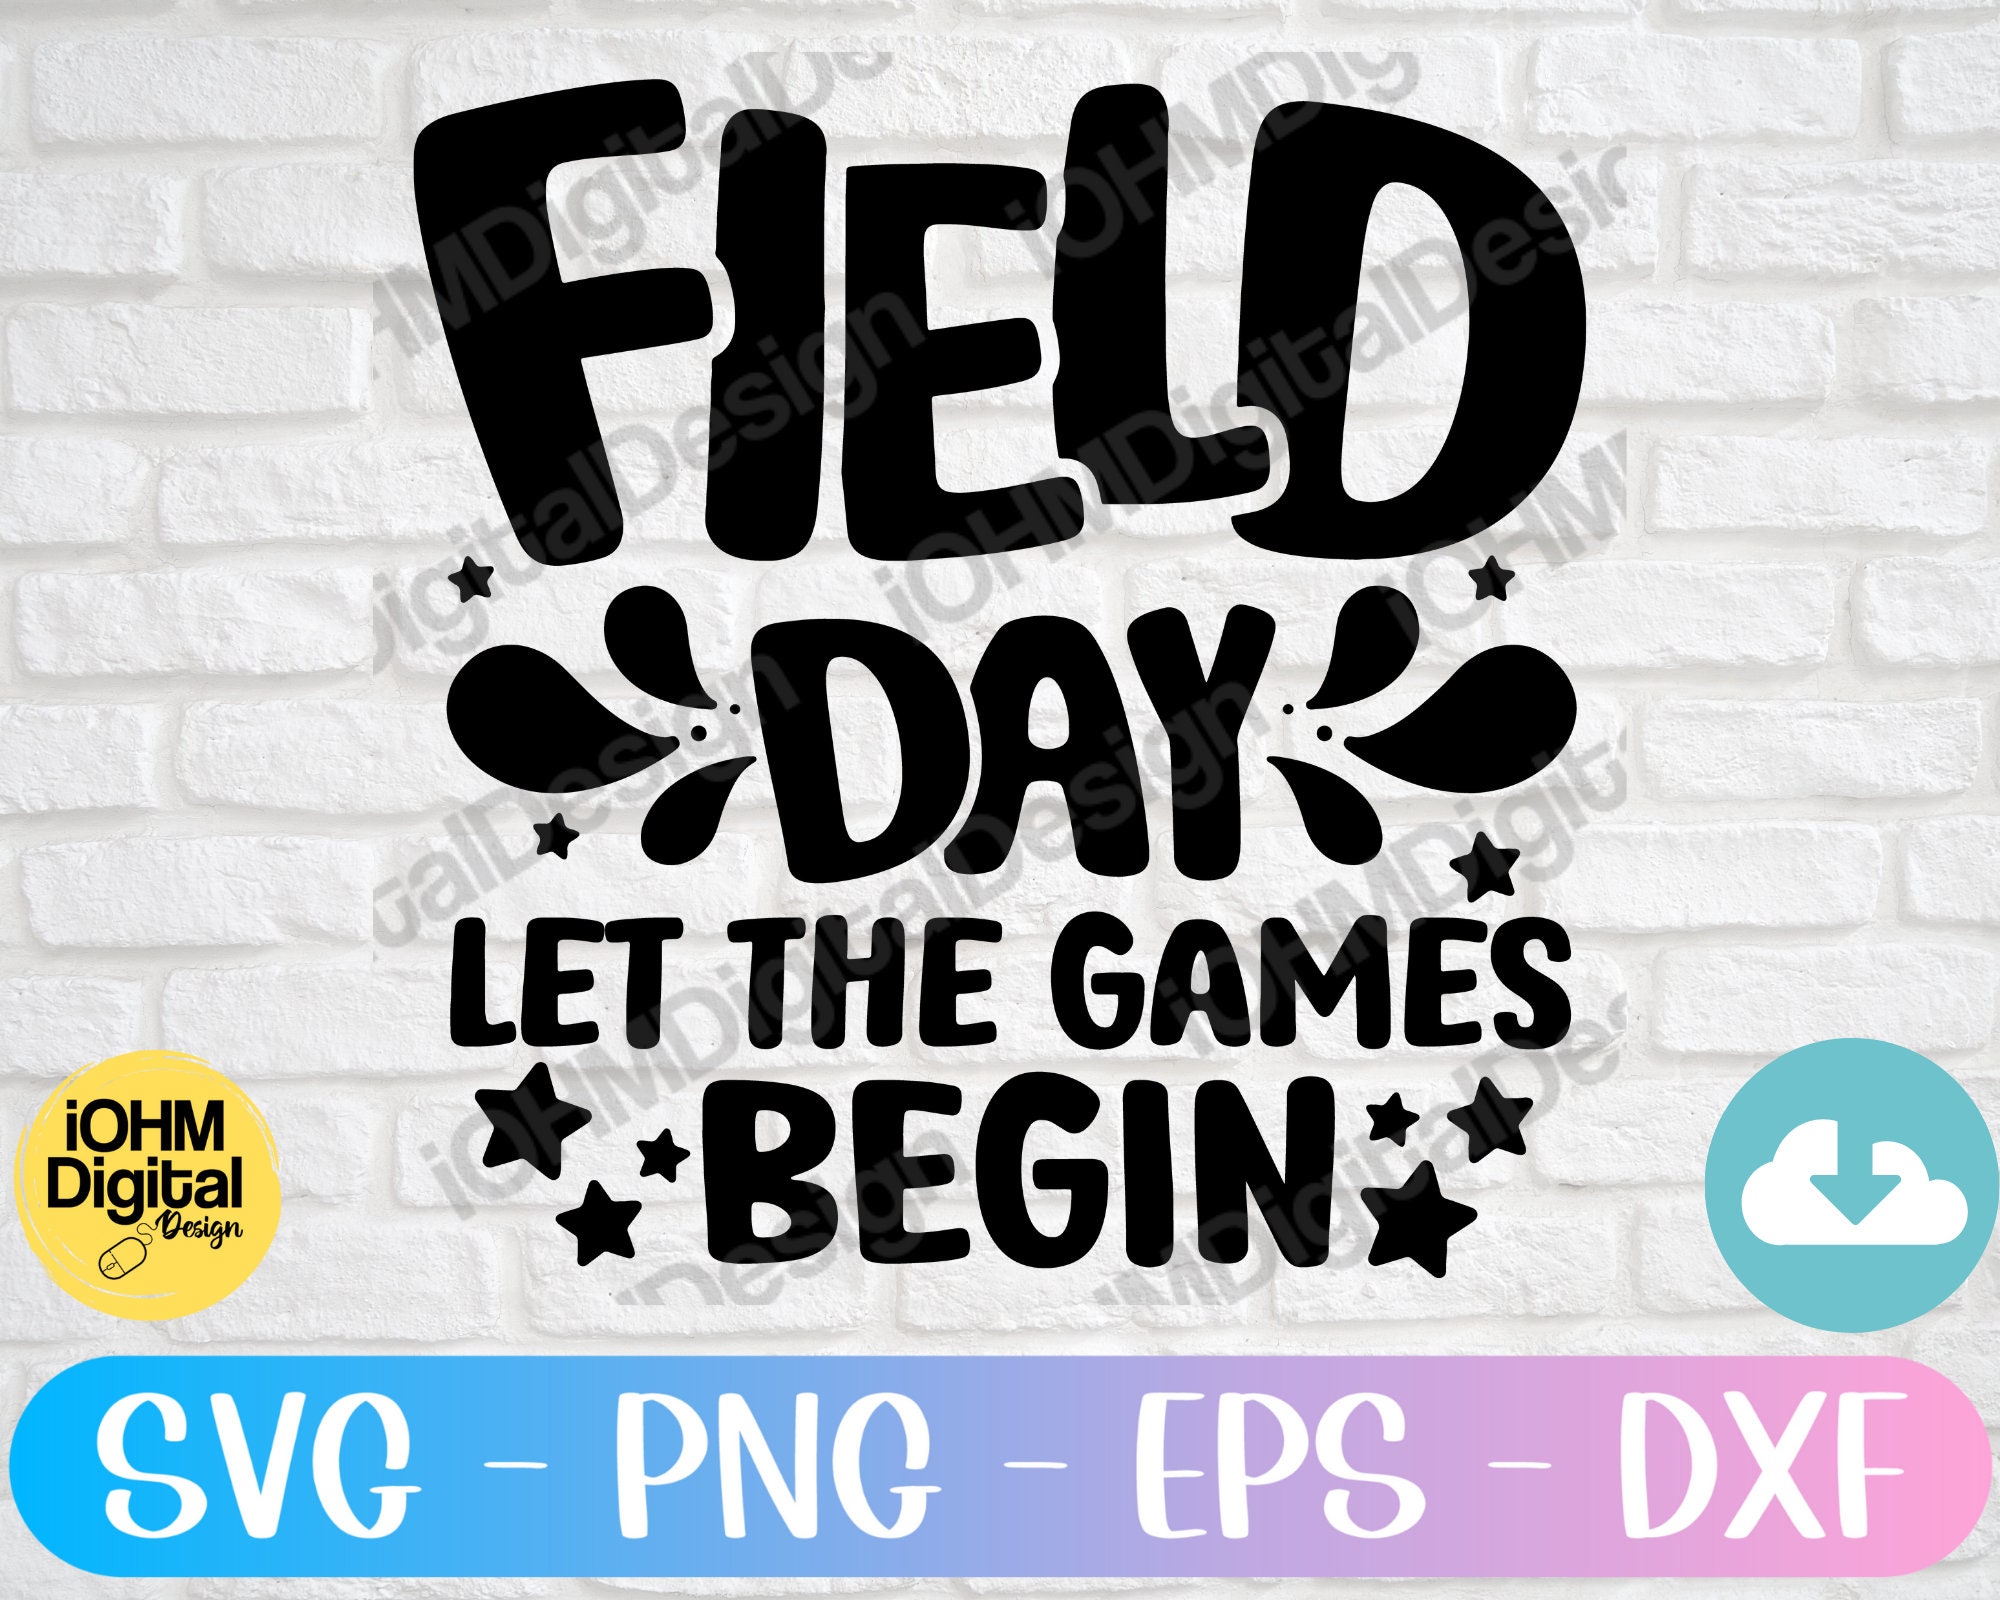 Field Day Let the Games Begins Field Day Vibes Svg (Instant Download) 